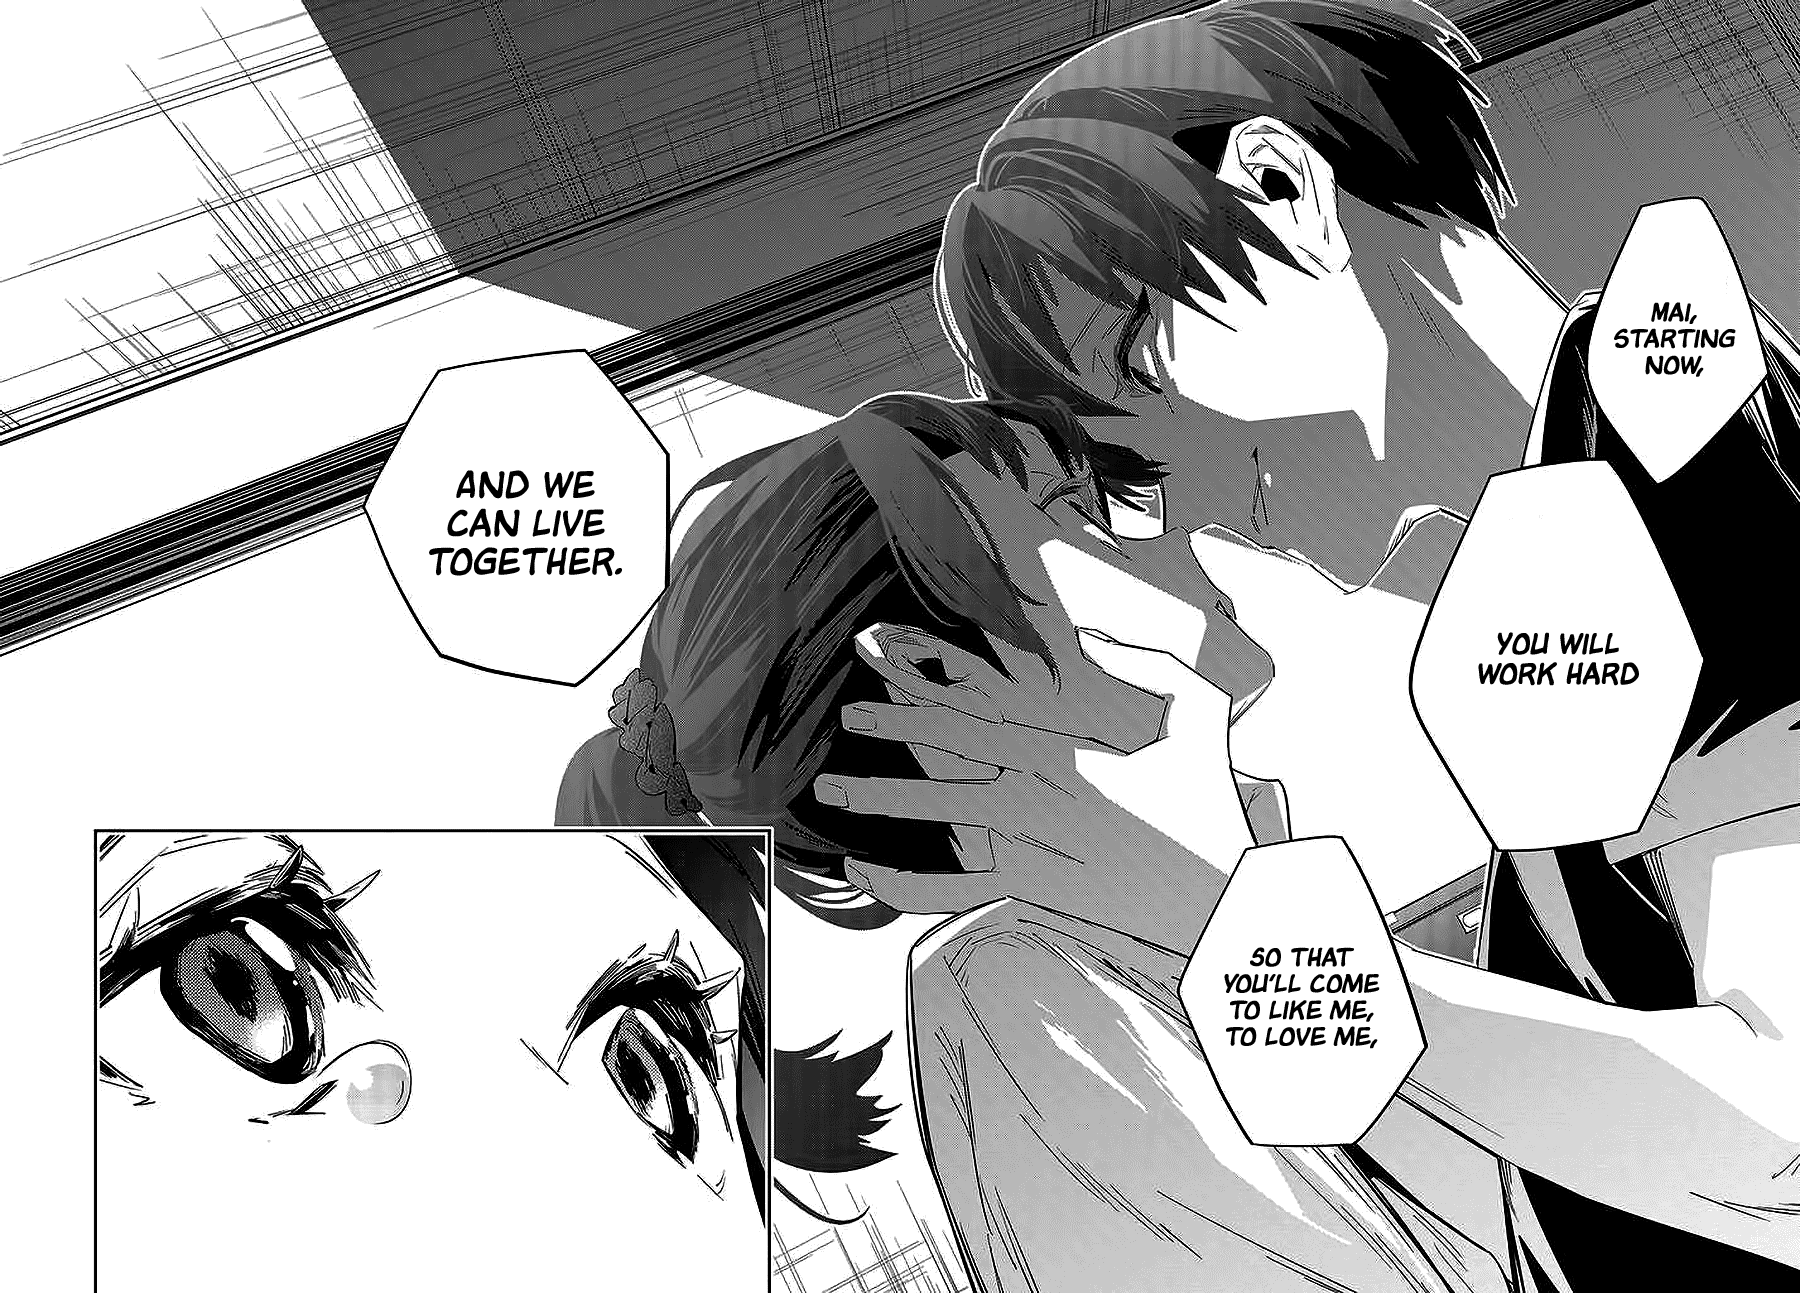 I Reincarnated As The Little Sister Of A Death Game Manga's Murder Mastermind And Failed Chapter 1 #11